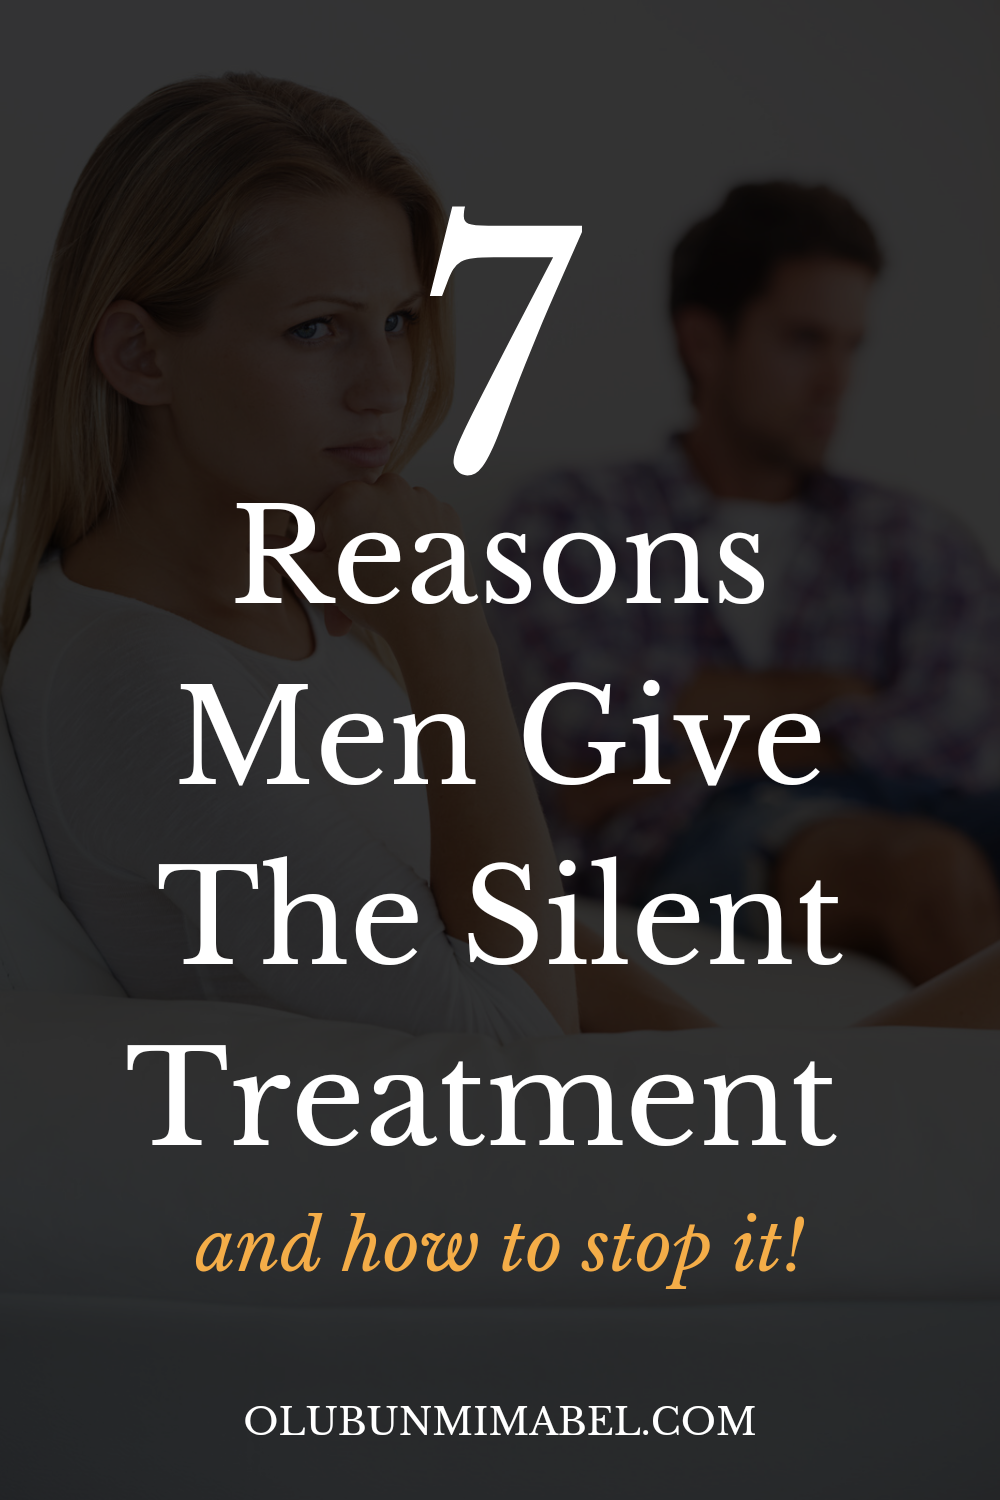 Why Do Guys Give The Silent Treatment?